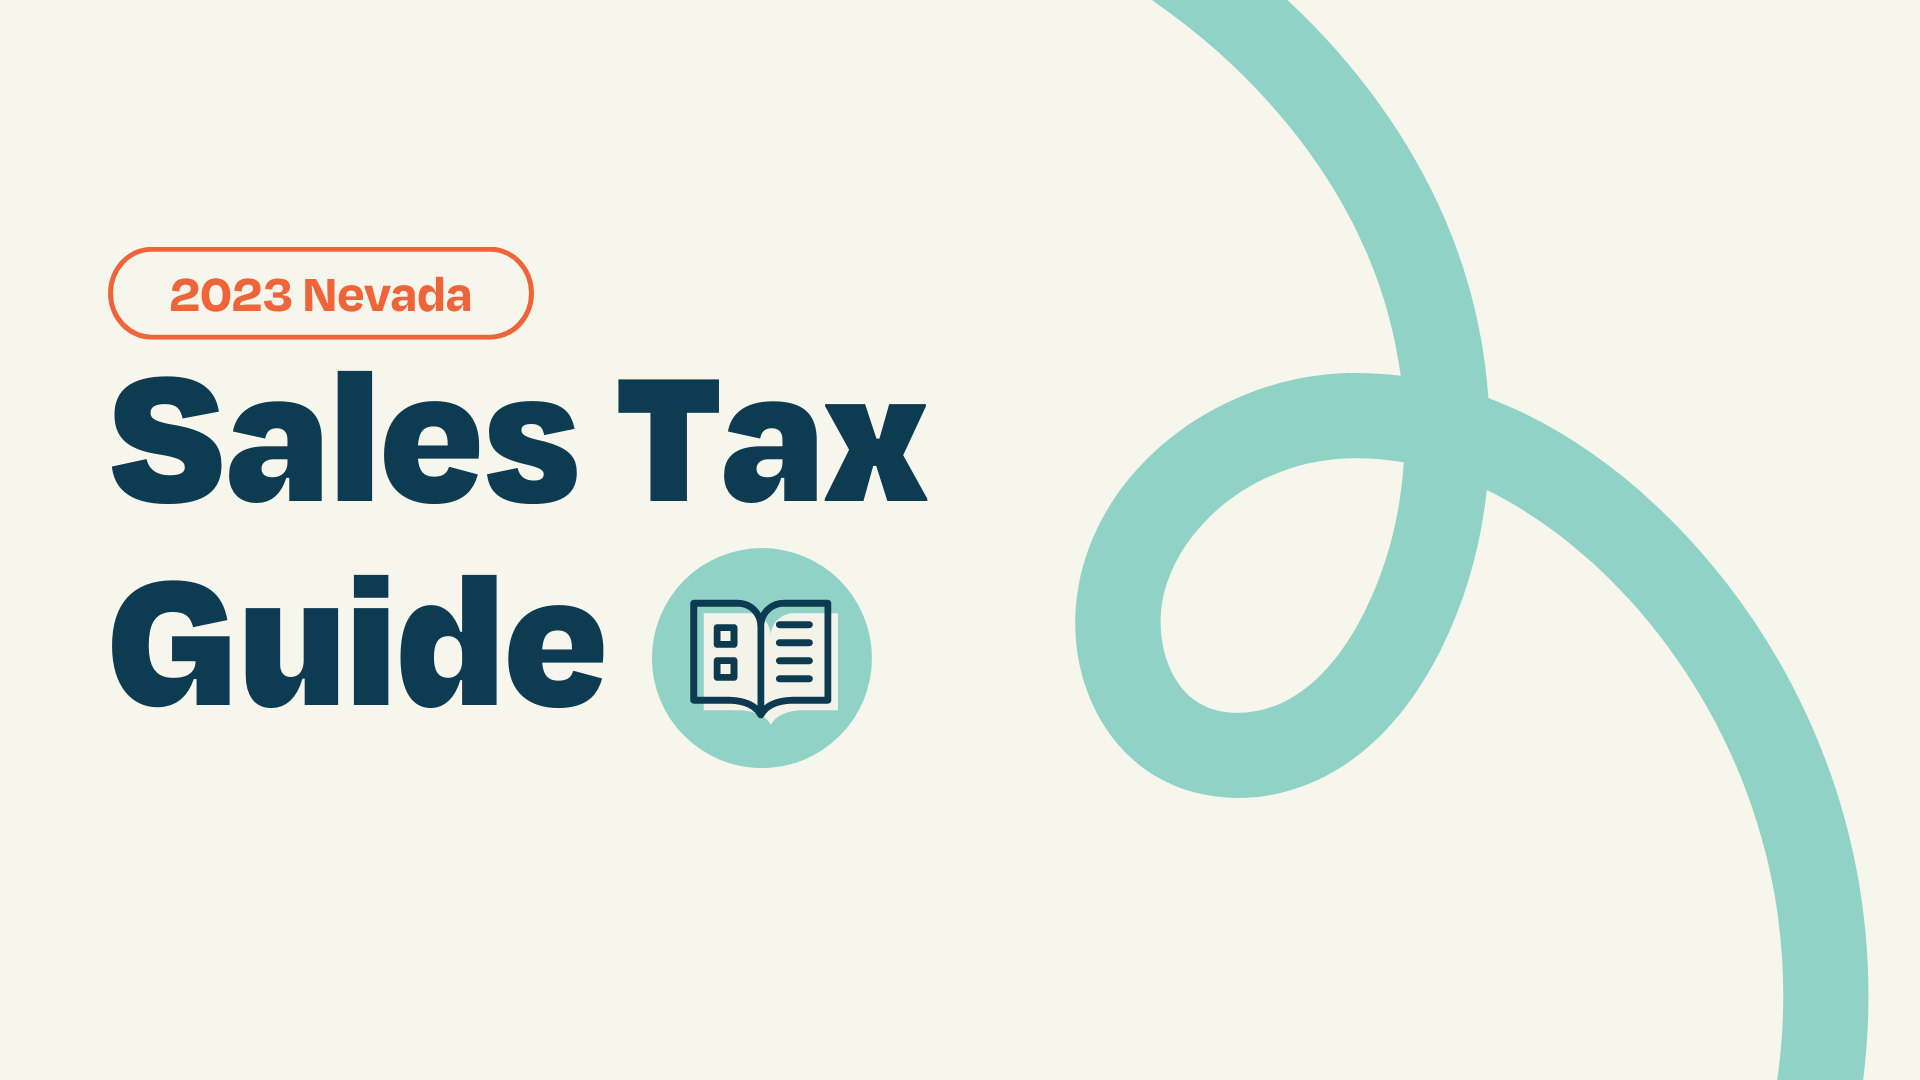 Nevada 2023 Sales Tax Guide